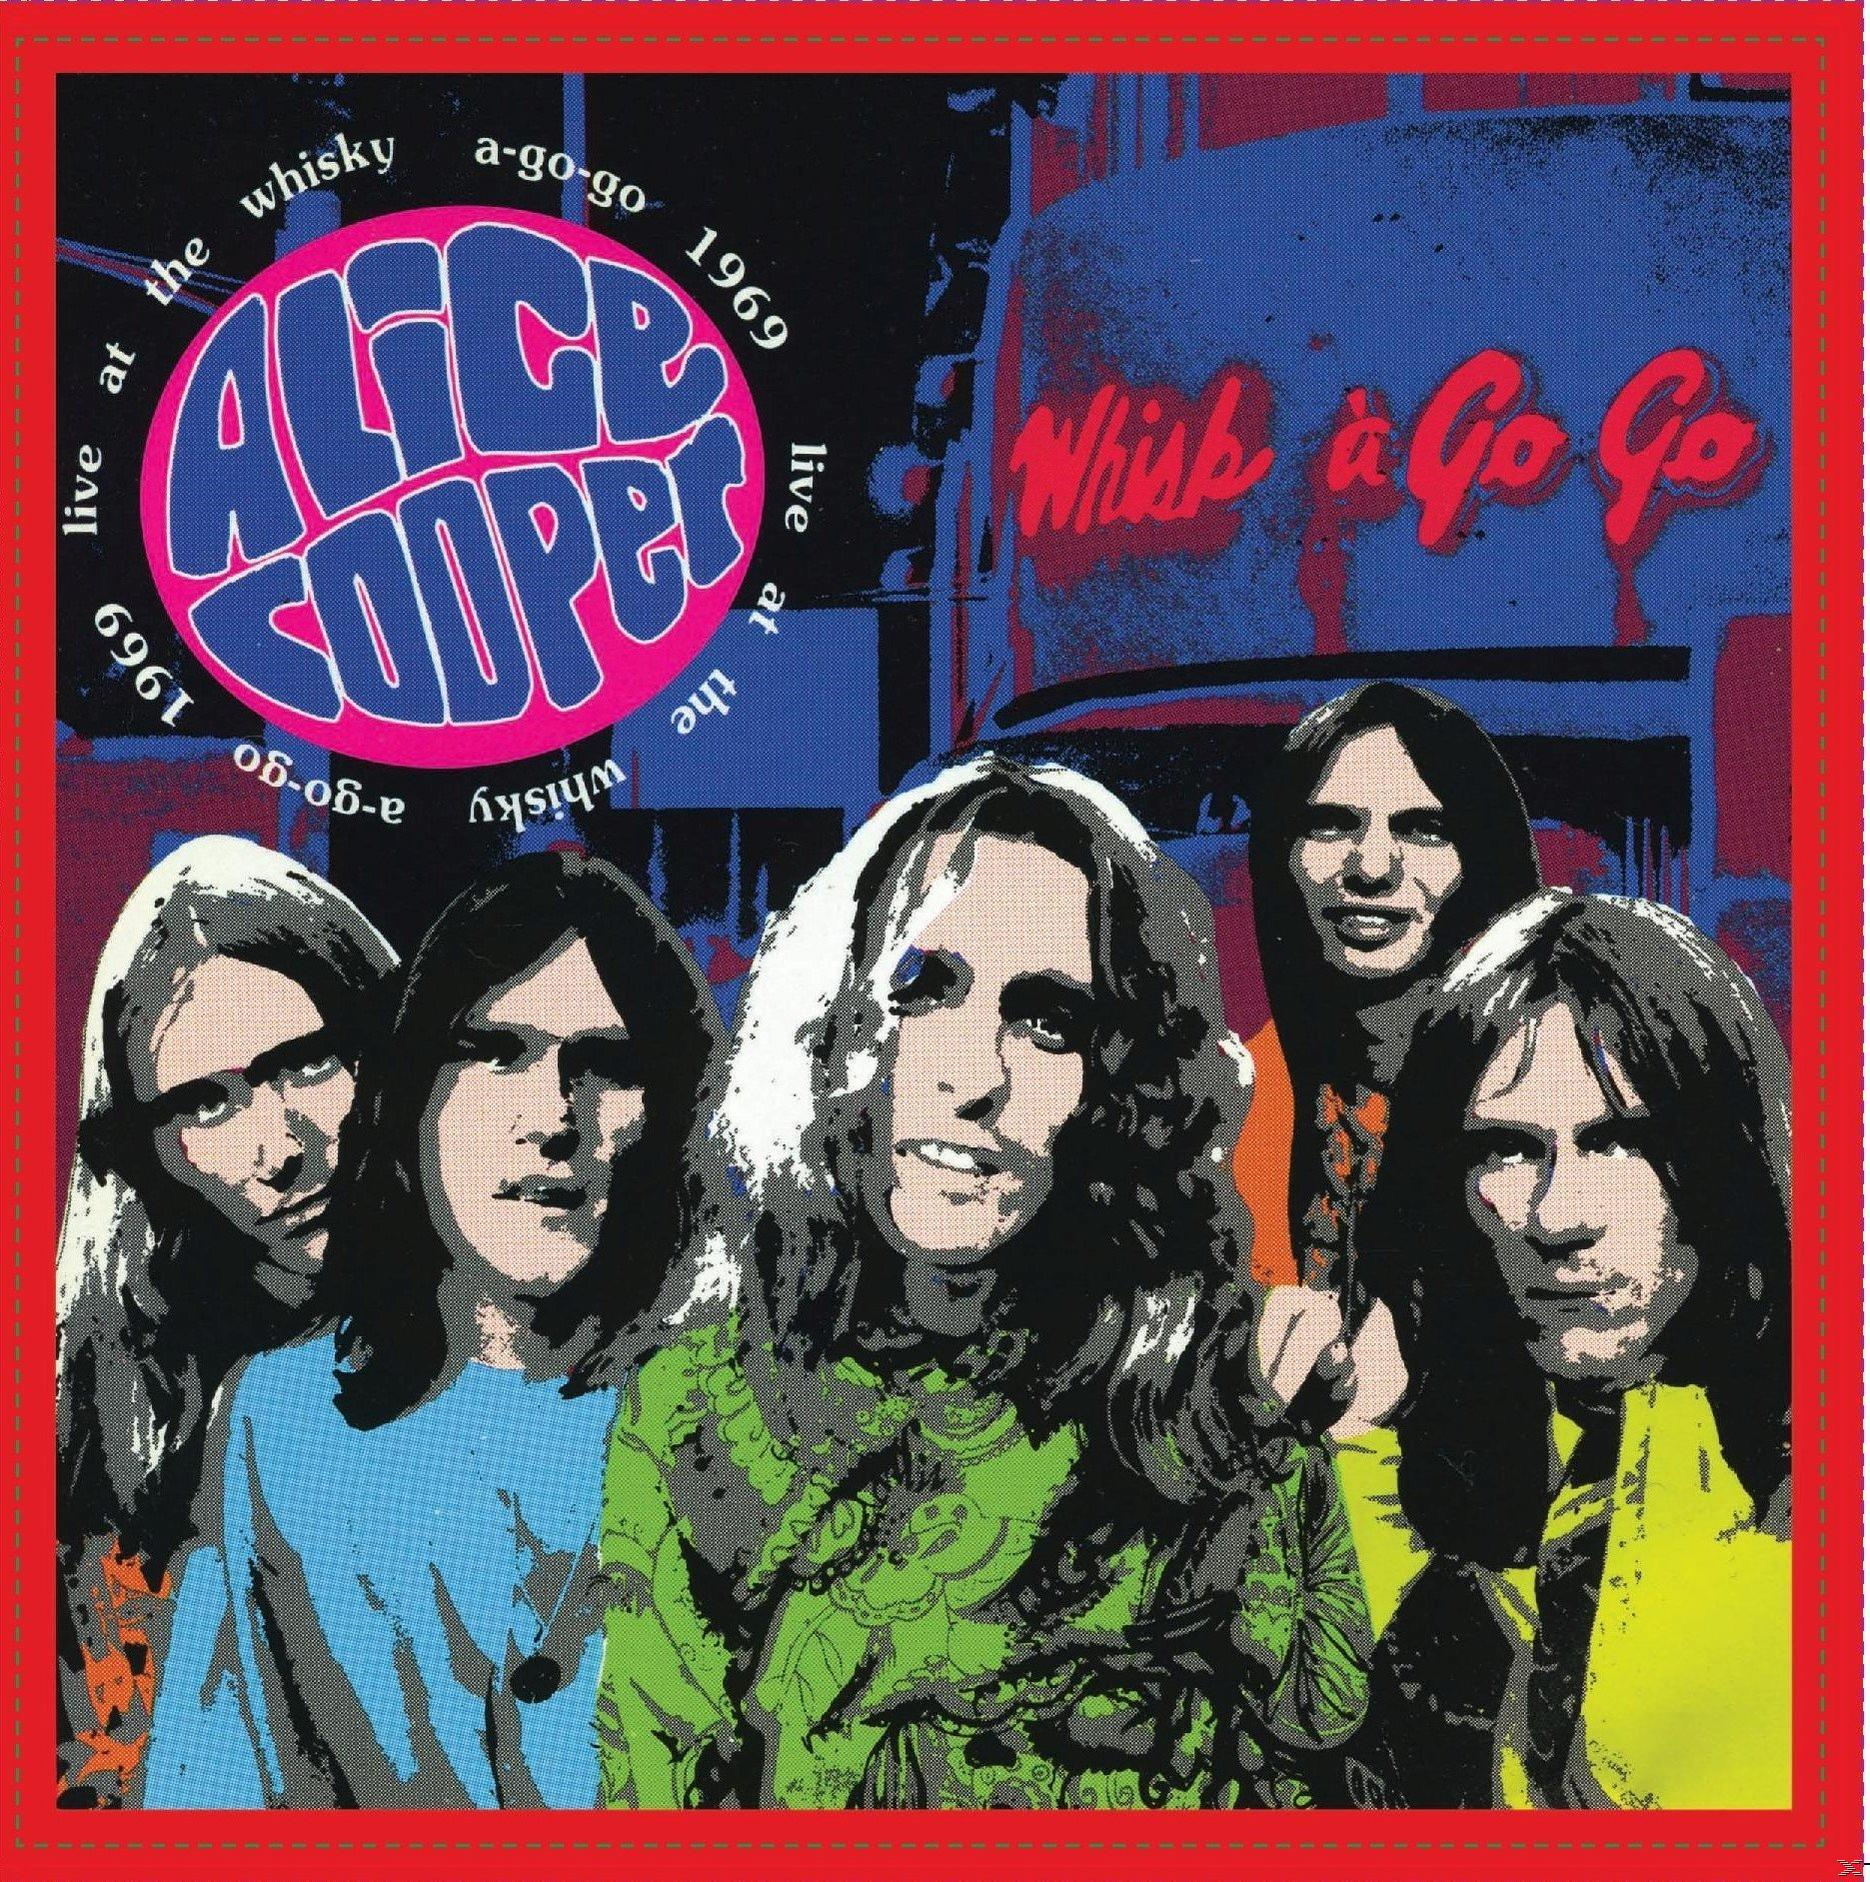 Alice Cooper - Live At 1969 (Vinyl) Go-Go, - The A Whiskey